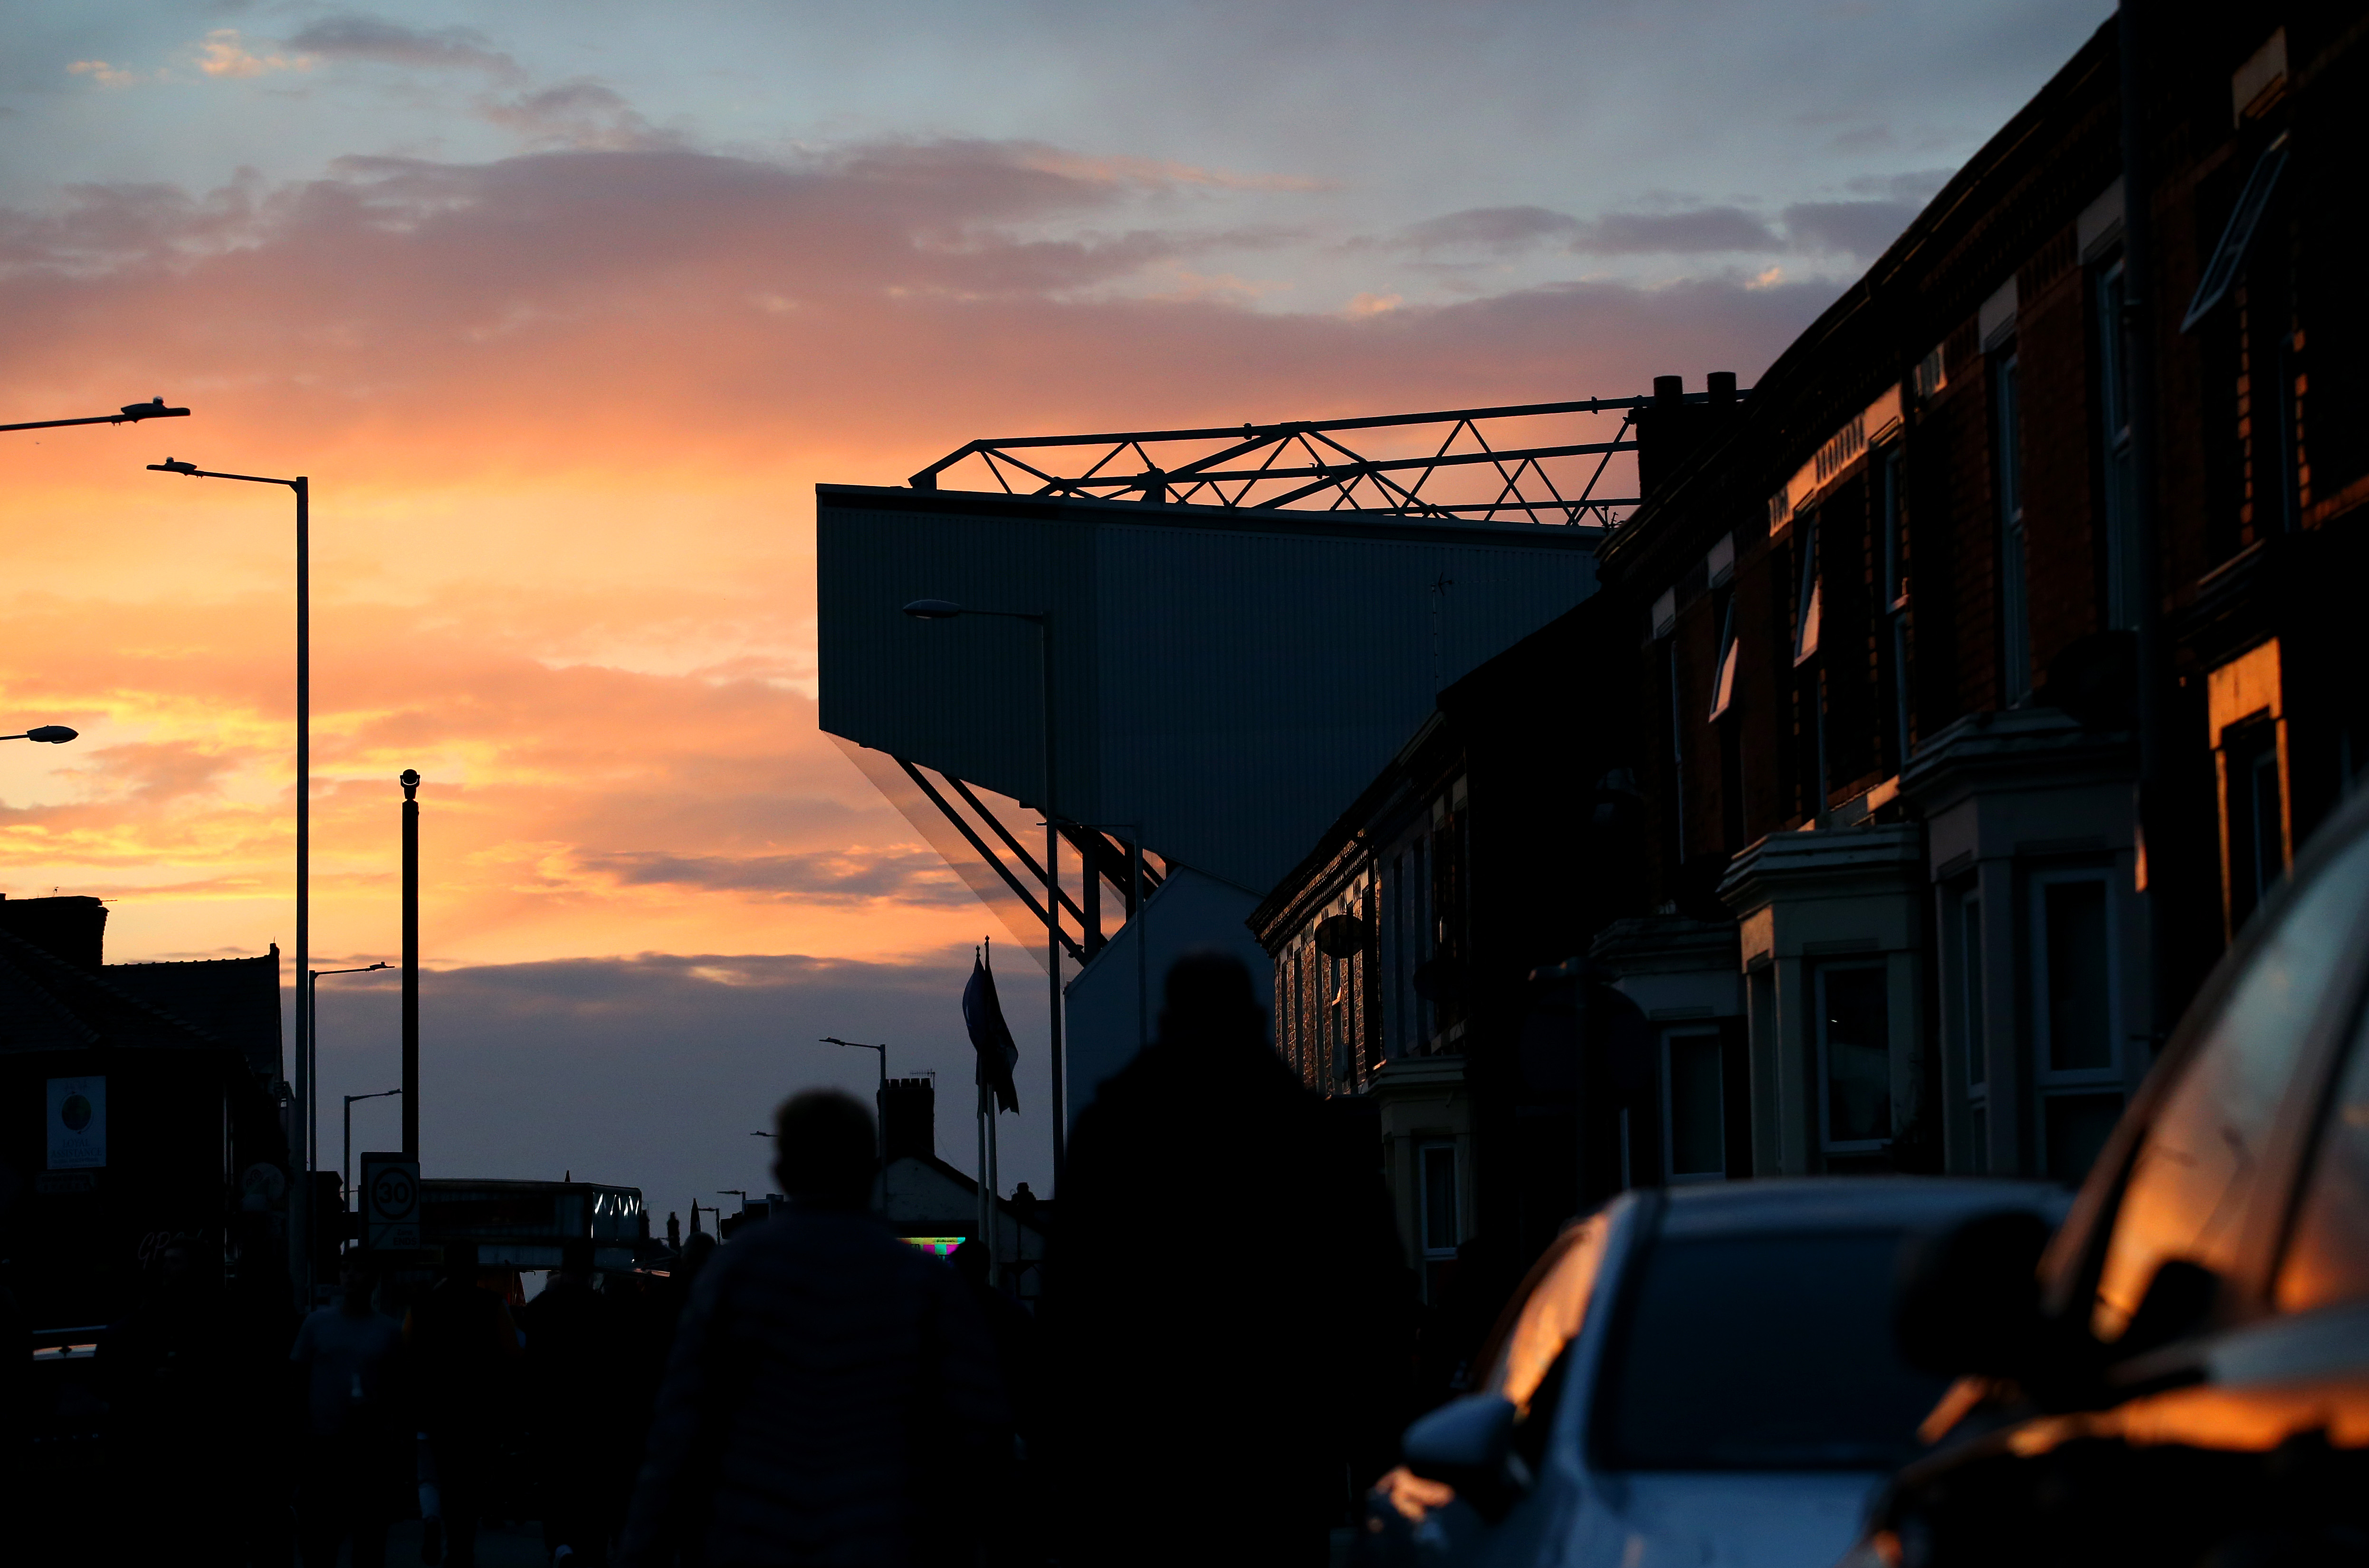 Anfield is seen through the streets as the sun sets prior to the UEFA Champions League group B match between Liverpool FC and AC Milan at Anfield on September 15, 2021 in Liverpool, England.